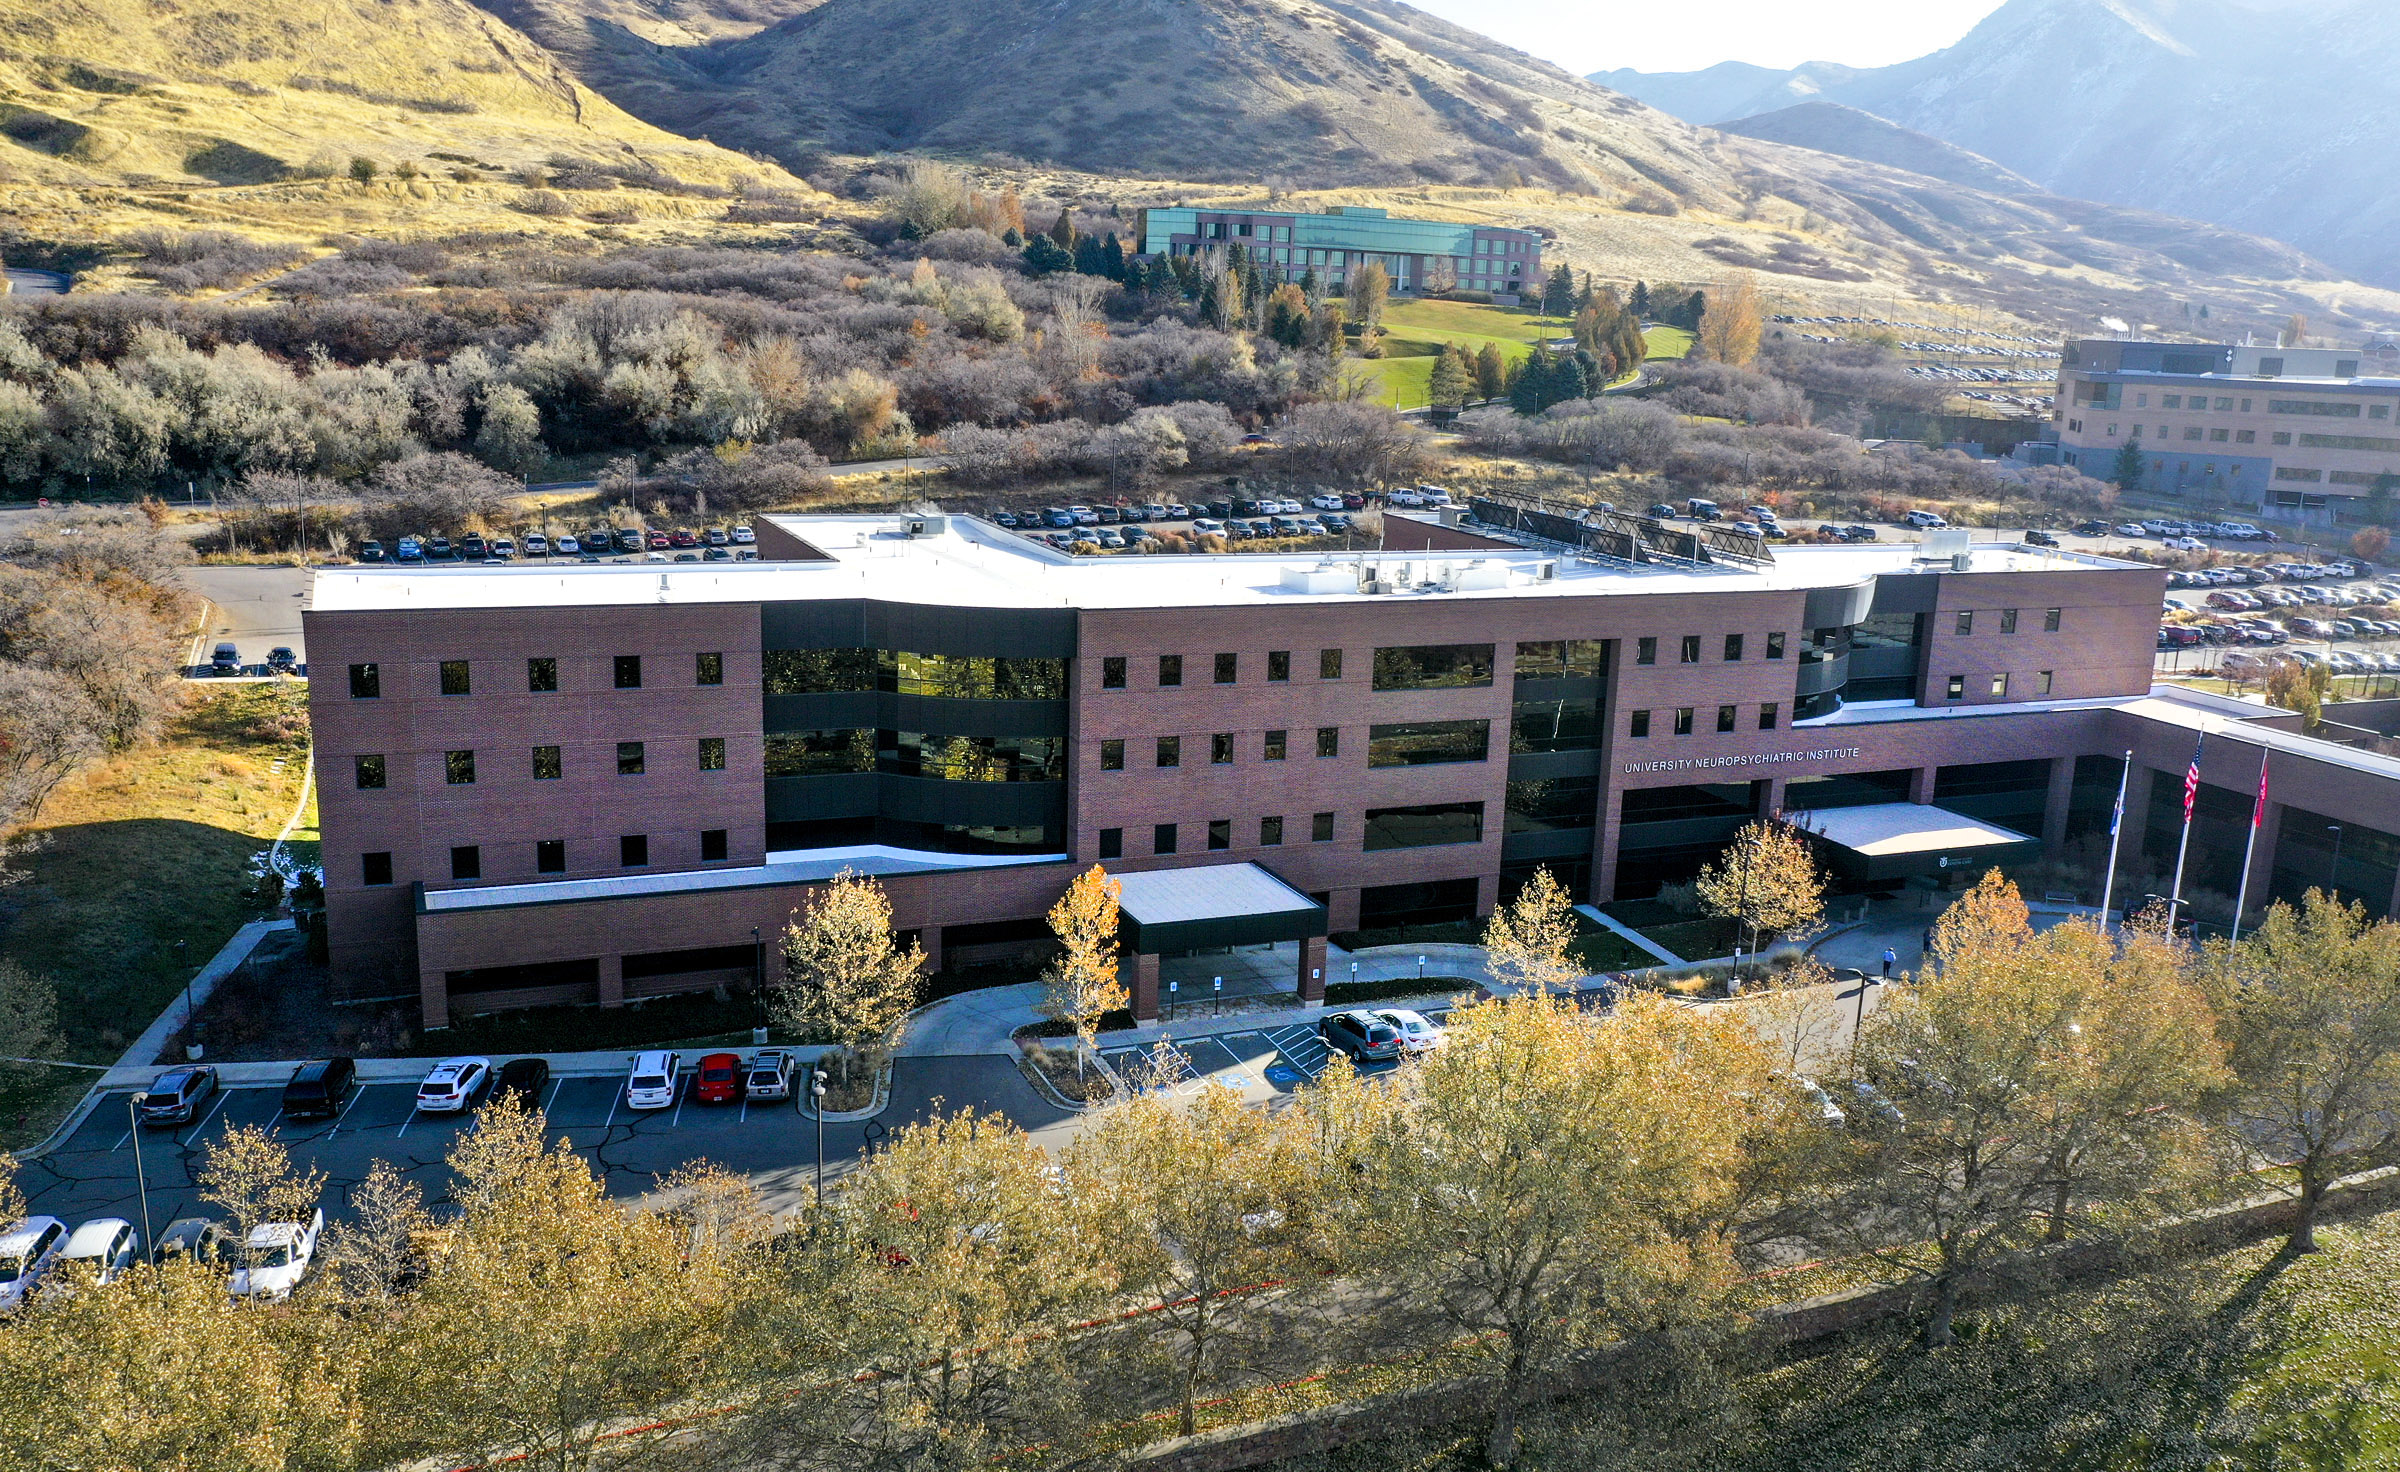 Image of the Huntsman Mental Health Institute on the campus of the University of Utah., which along...